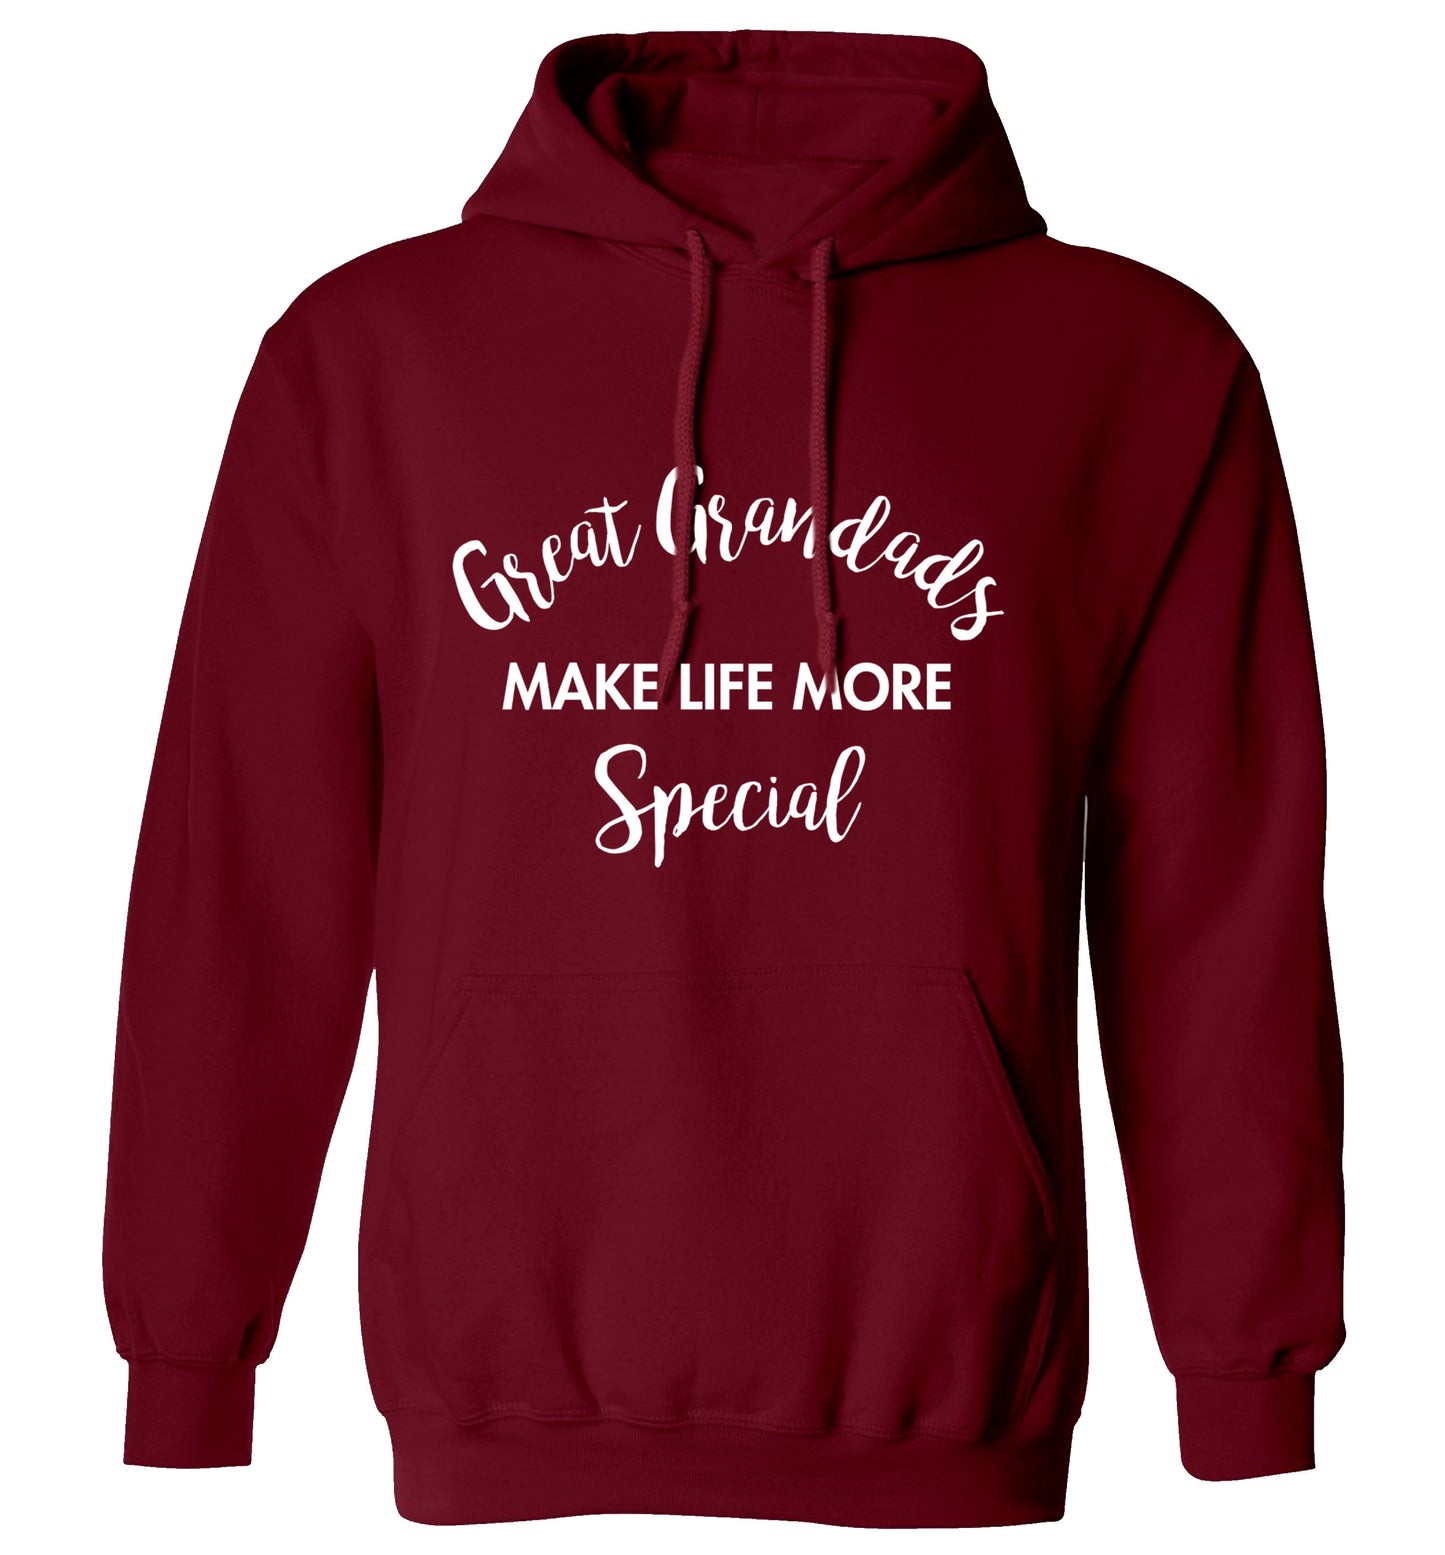 Great Grandads make life more special adults unisex maroon hoodie 2XL